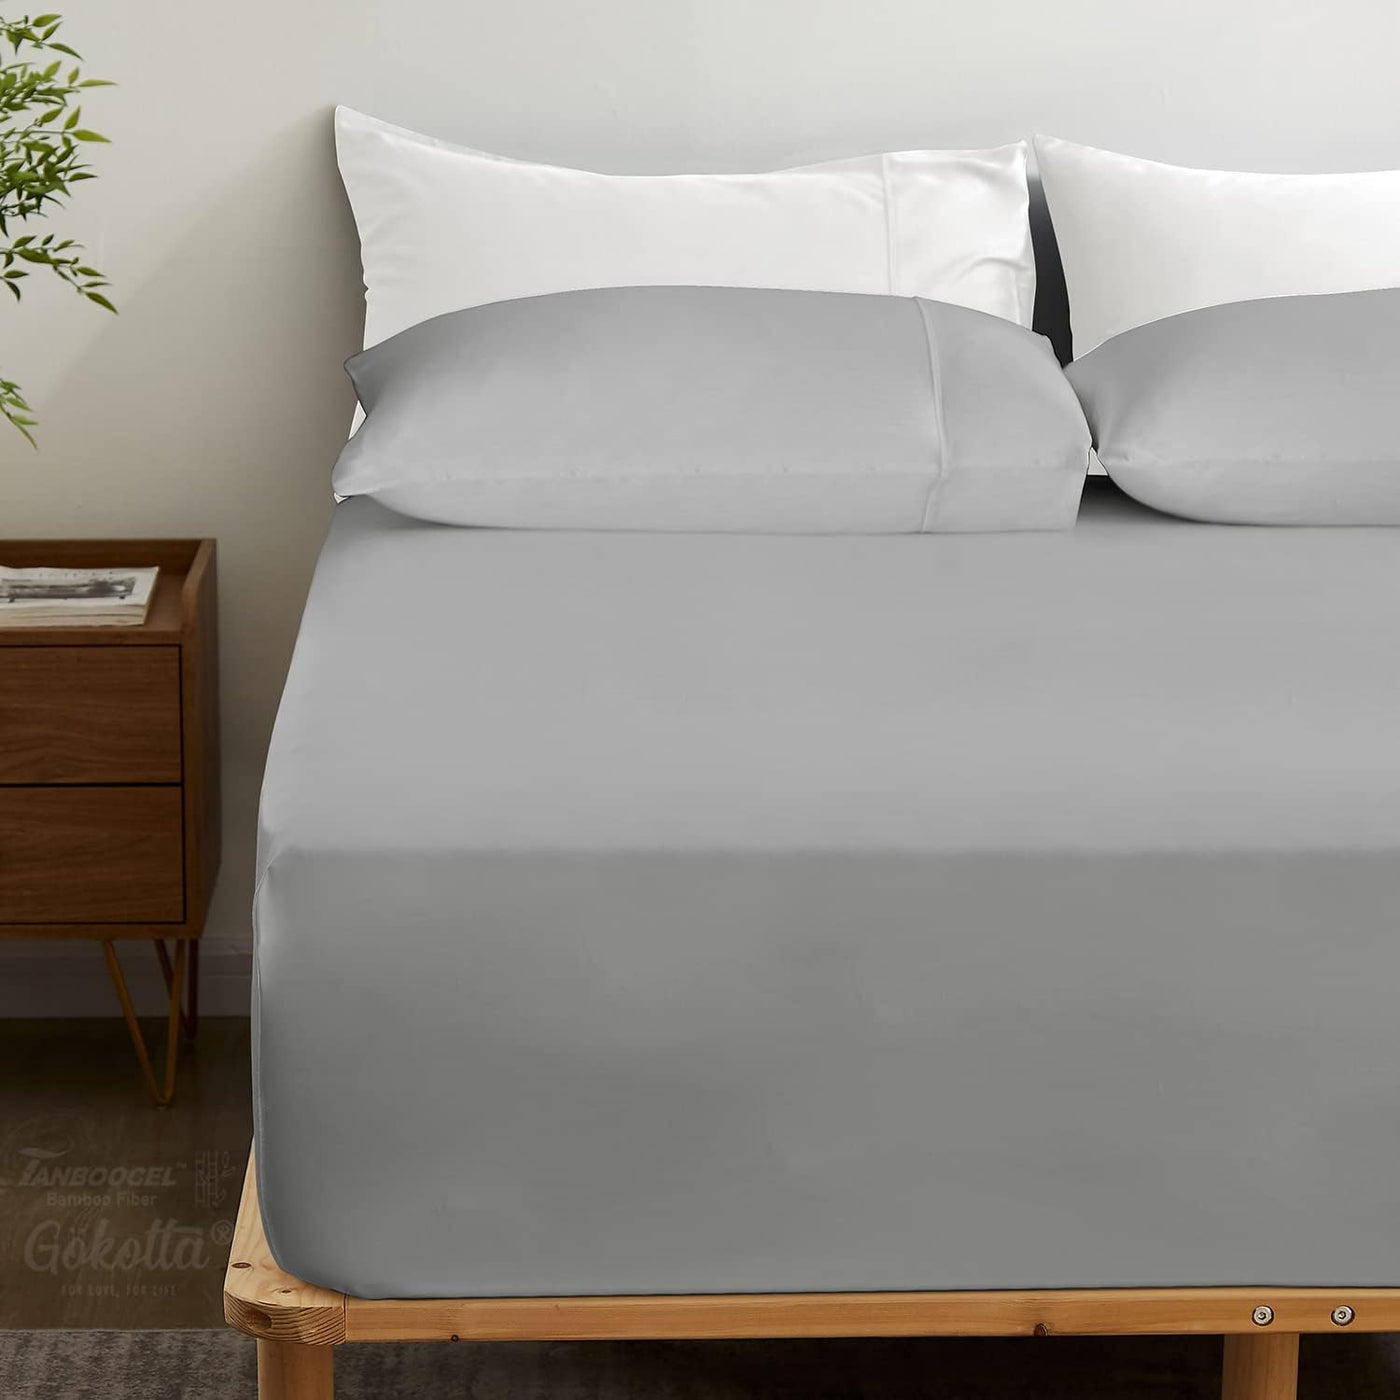  GOKOTTA Fitted Sheet Only - 16 Inch Pocket Bamboo Fitted Sheet,  Super Soft and Cooling Bottom Sheet with 4 Elastic Corner Straps(Grey, King  Size) : Home & Kitchen